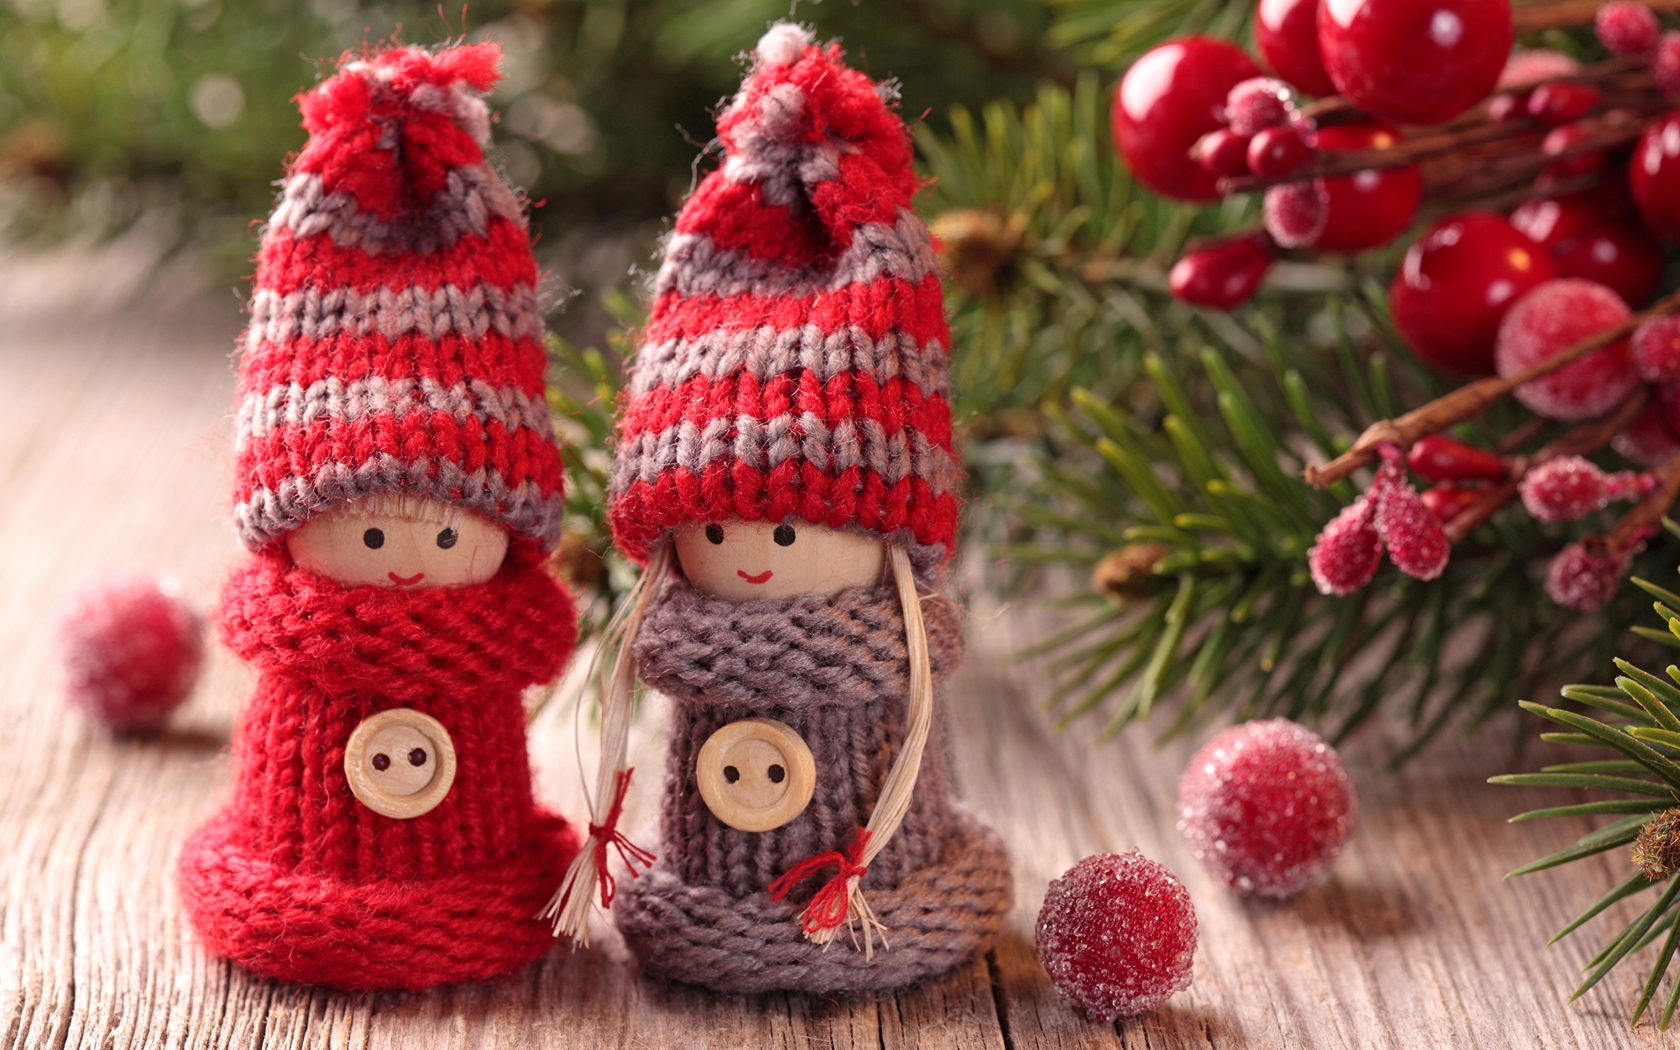 Image: Doll, toy, winter, knitted, hat, sprig, spruce, decoration, new year, Christmas